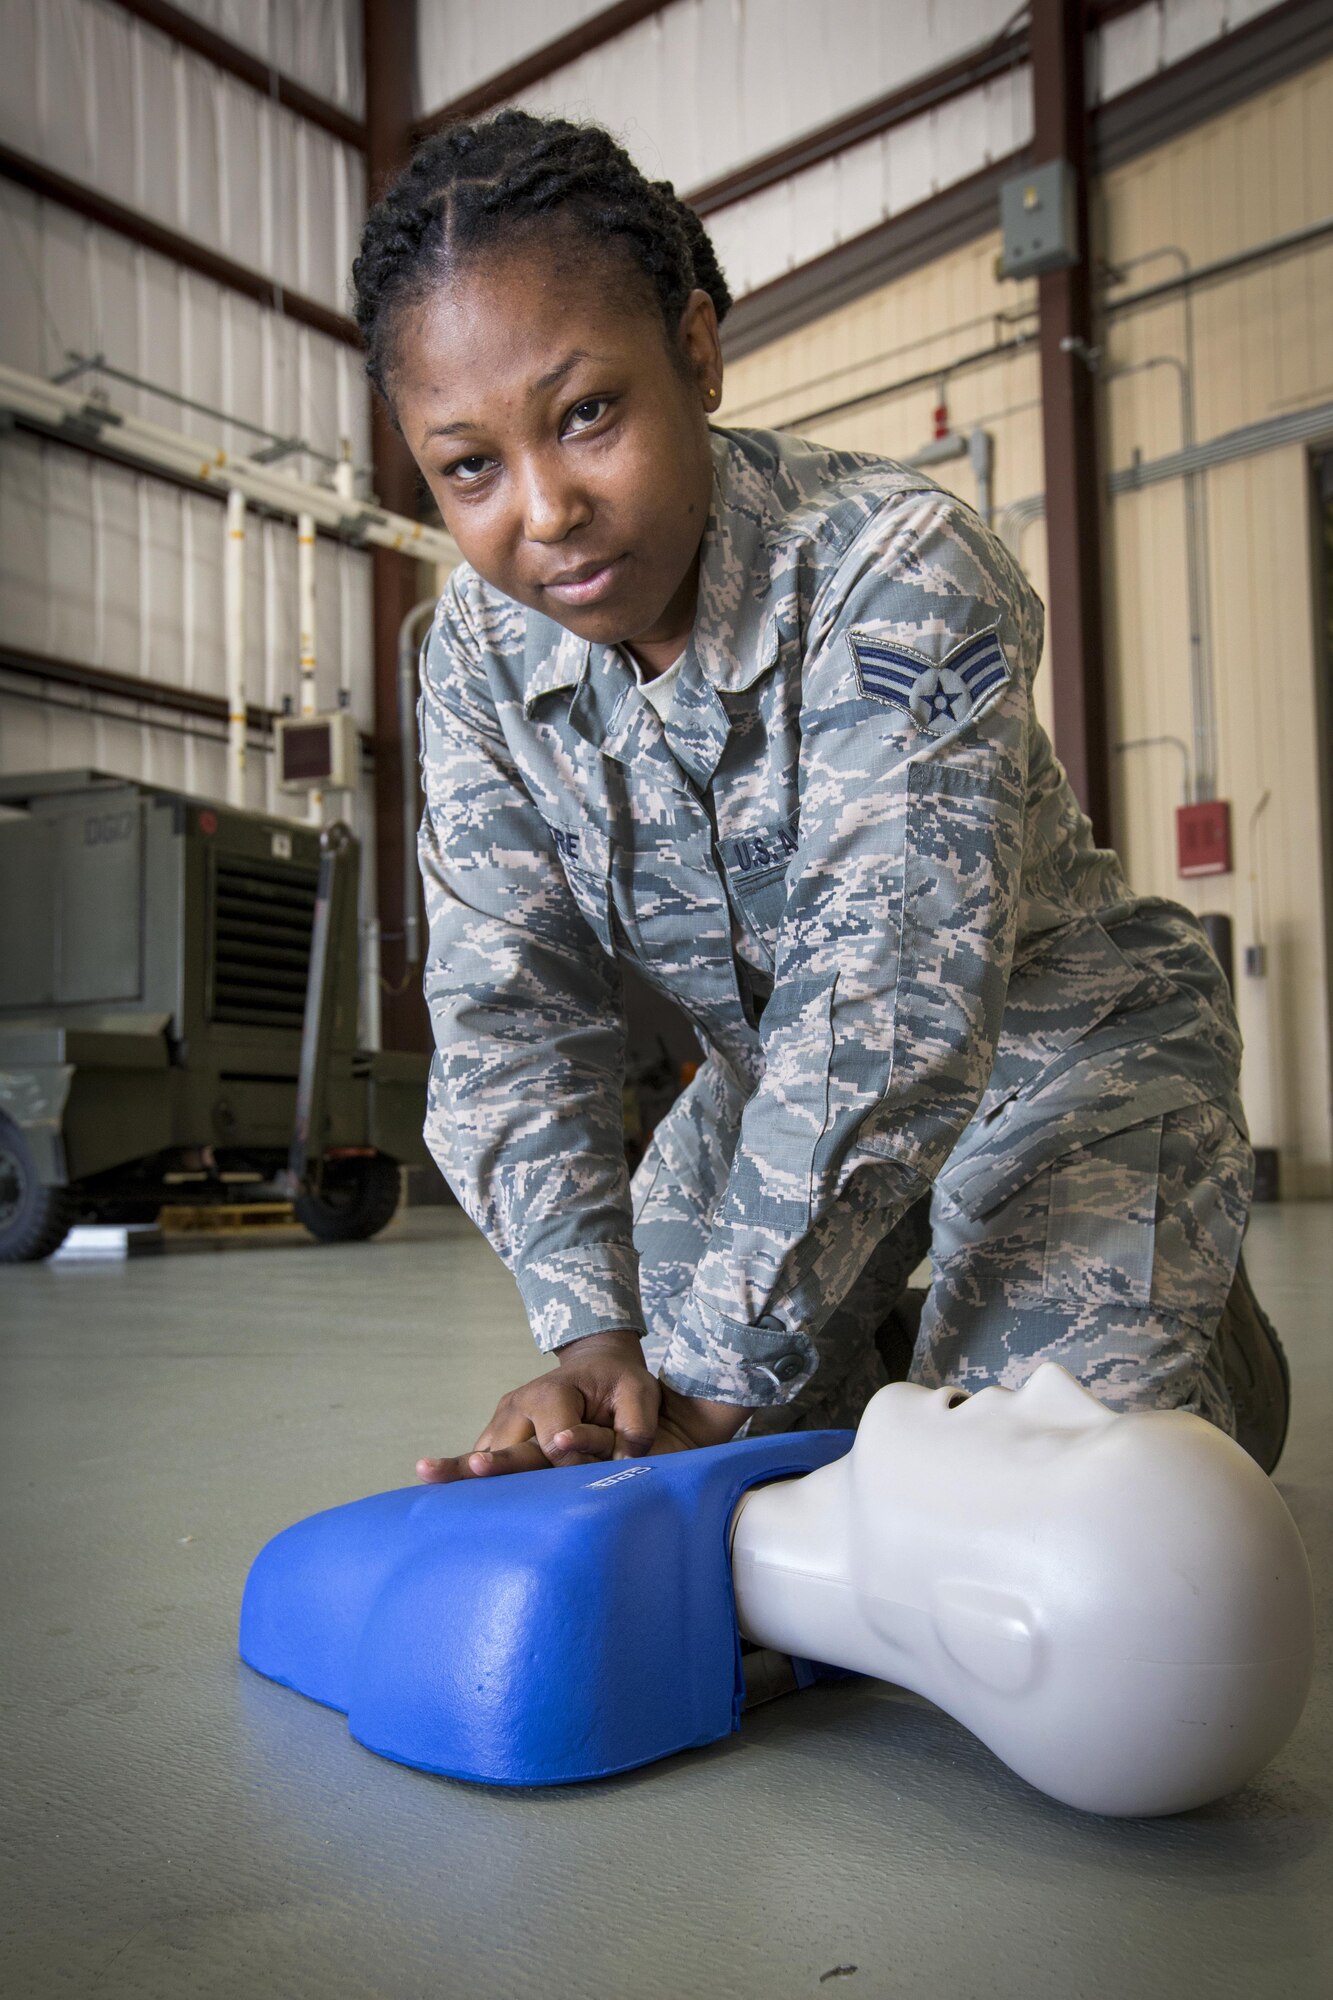 Airman seeks to build a generation of lifesavers